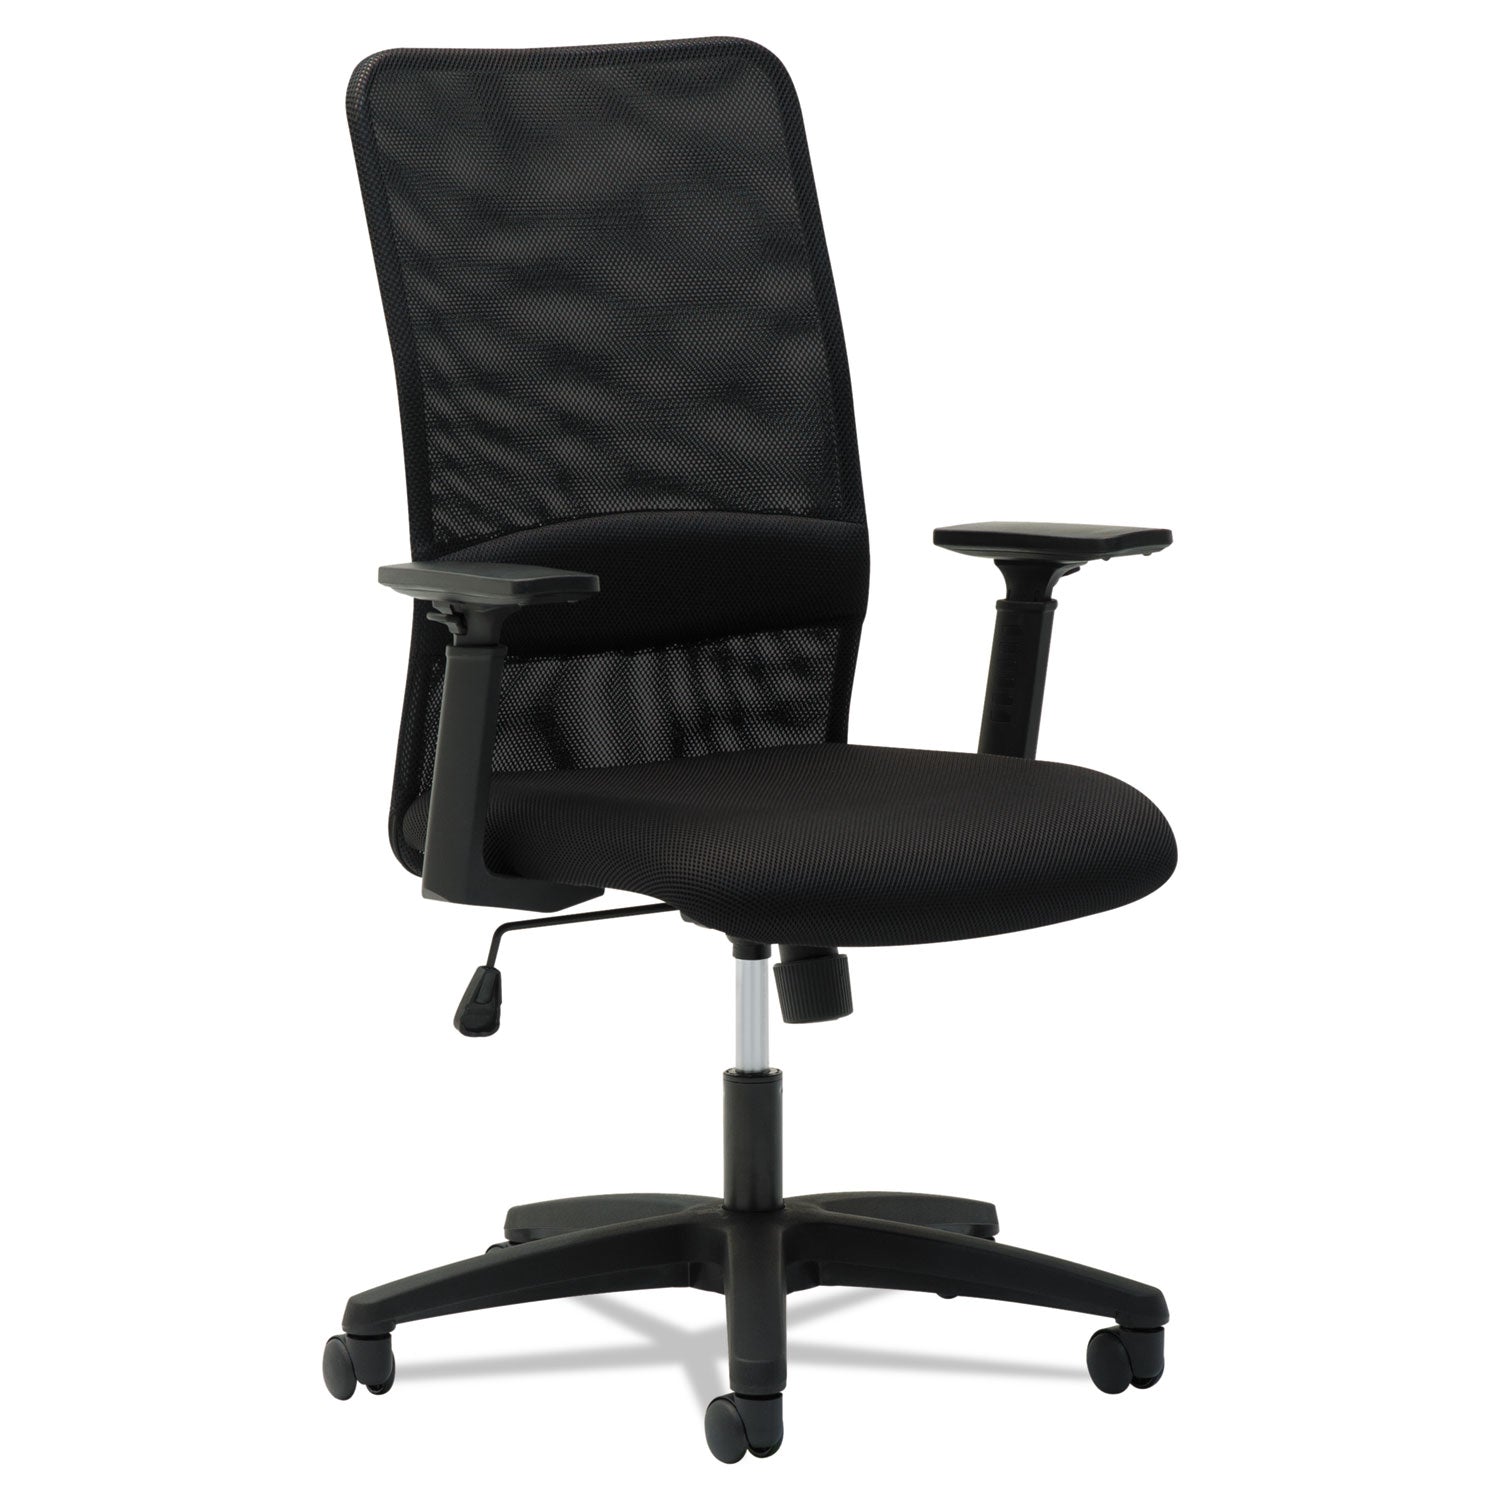 mesh-high-back-chair-supports-up-to-225-lb-16-to-205-seat-height-black_oifsm4117 - 1